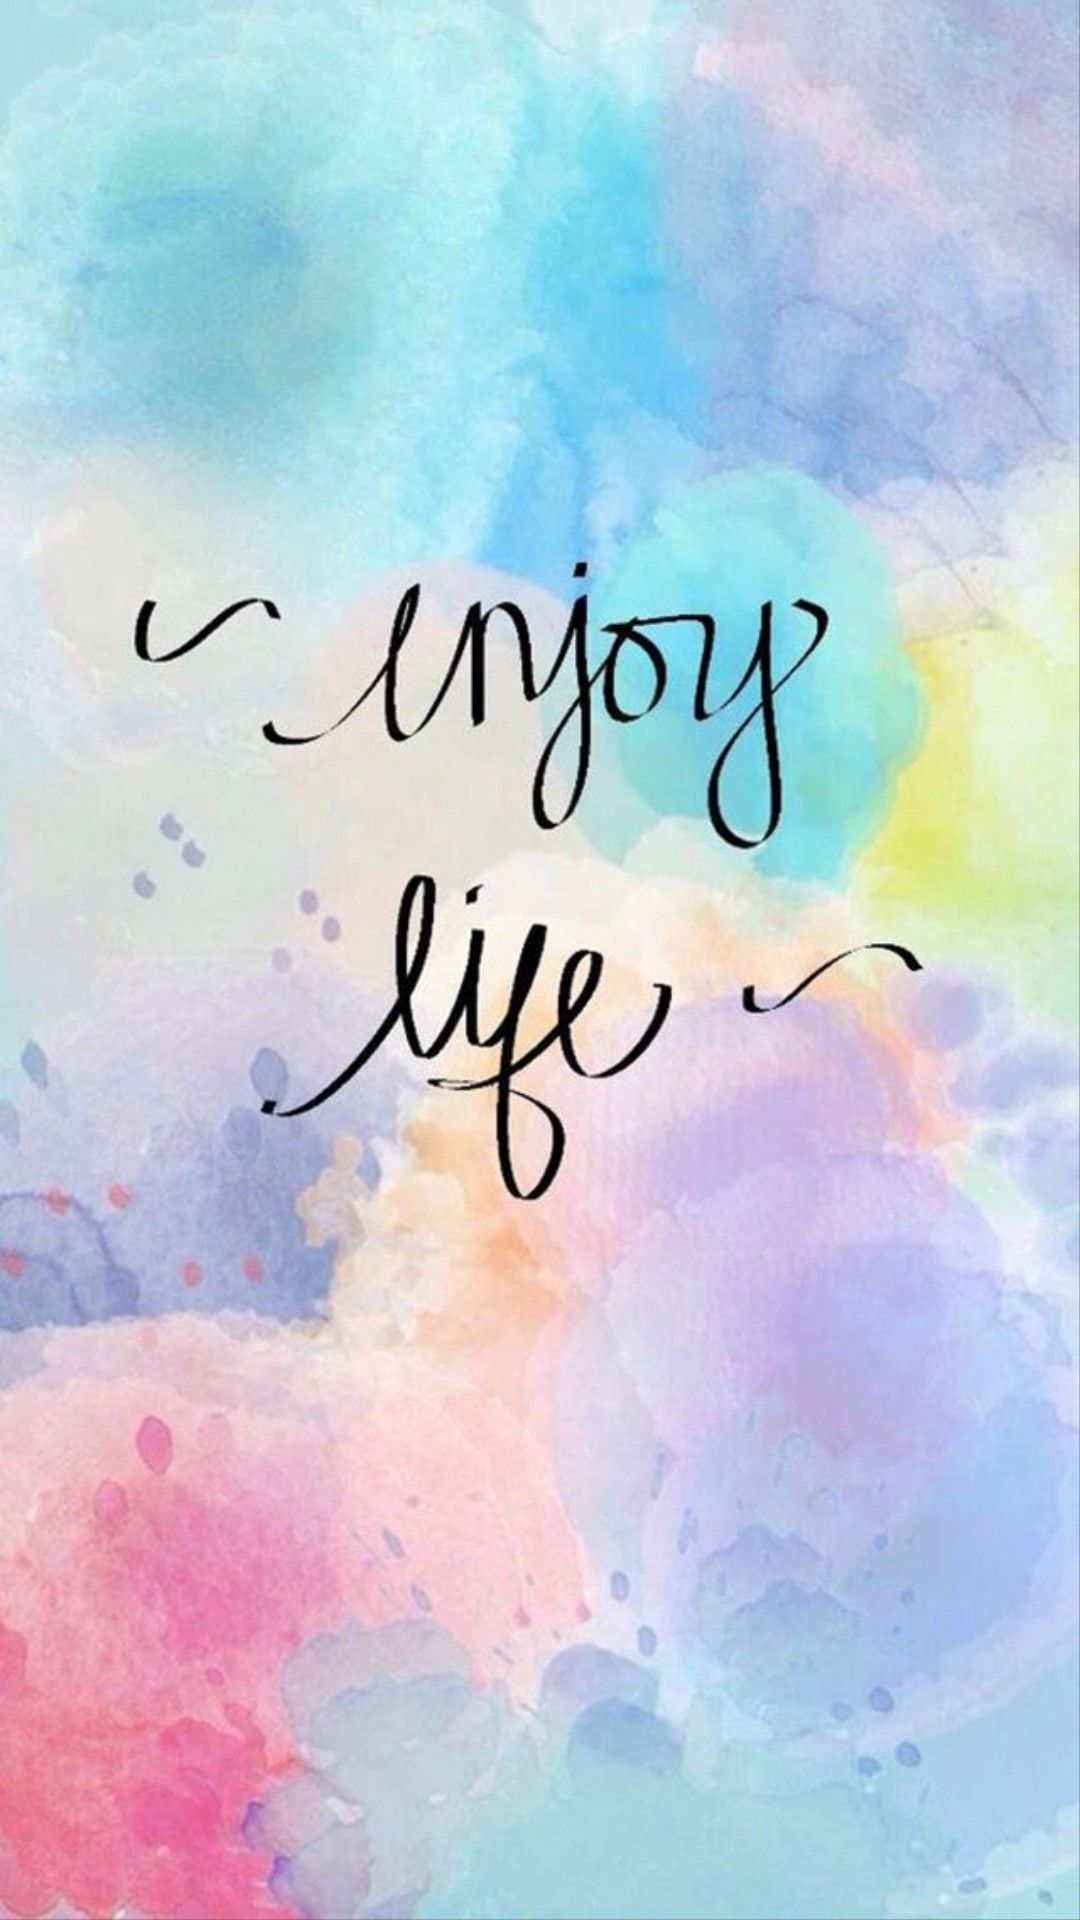 HD Quote Wallpaper Quotes Wallpaper Life quote enjoy life. Cute wallpaper quotes, Wallpaper quotes, Wallpaper iphone quotes